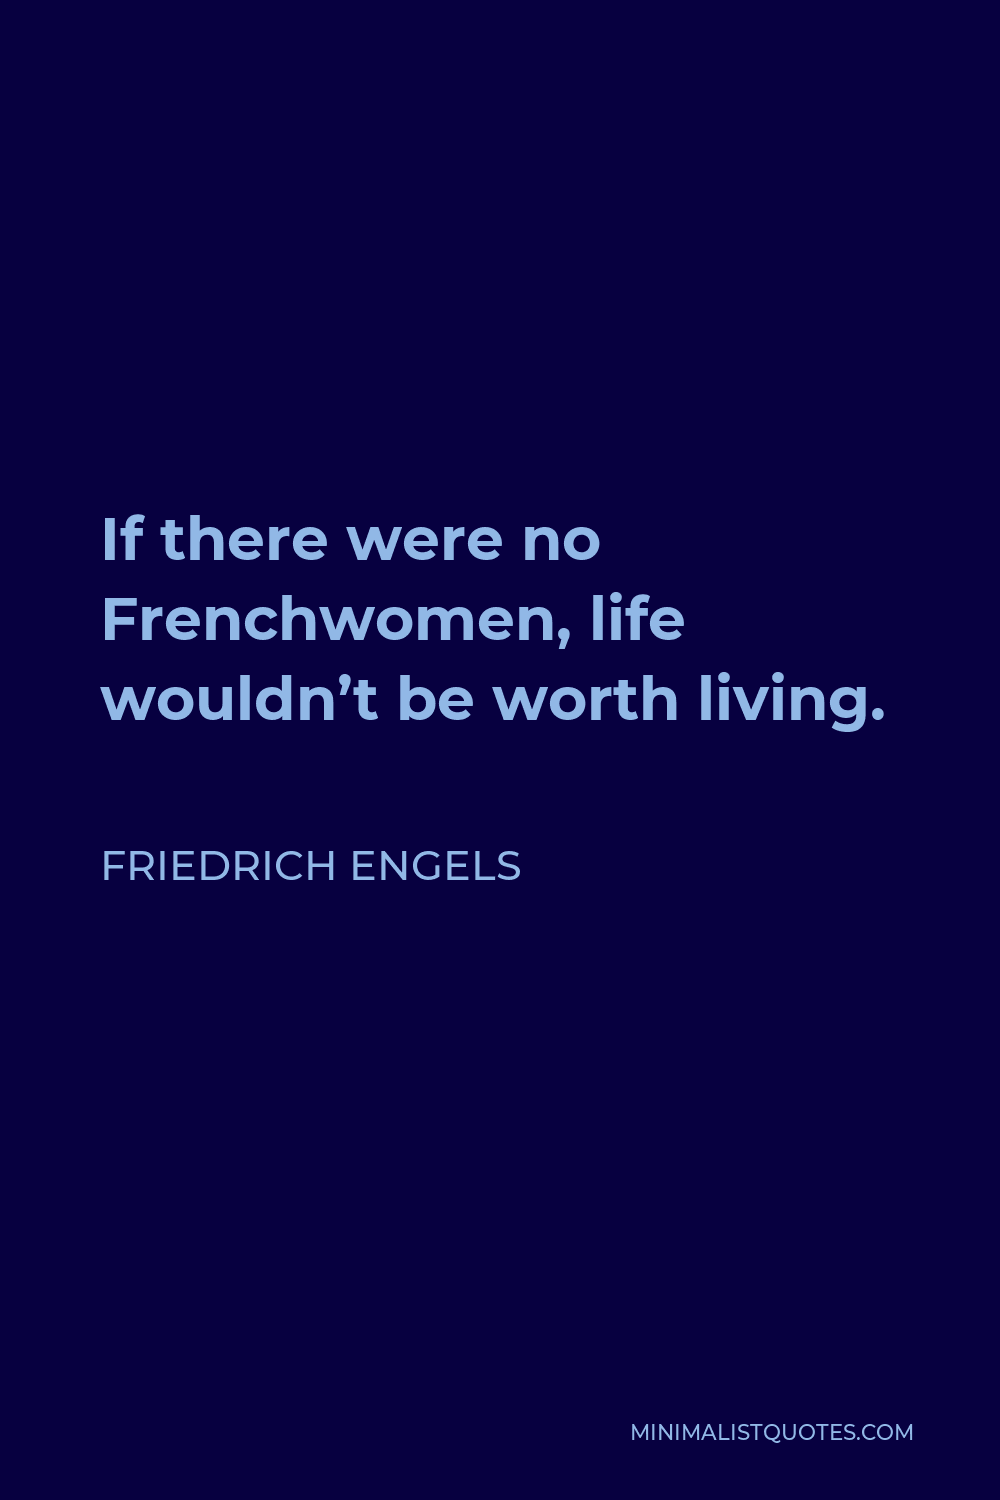 Friedrich Engels Quote - If there were no Frenchwomen, life wouldn’t be worth living.